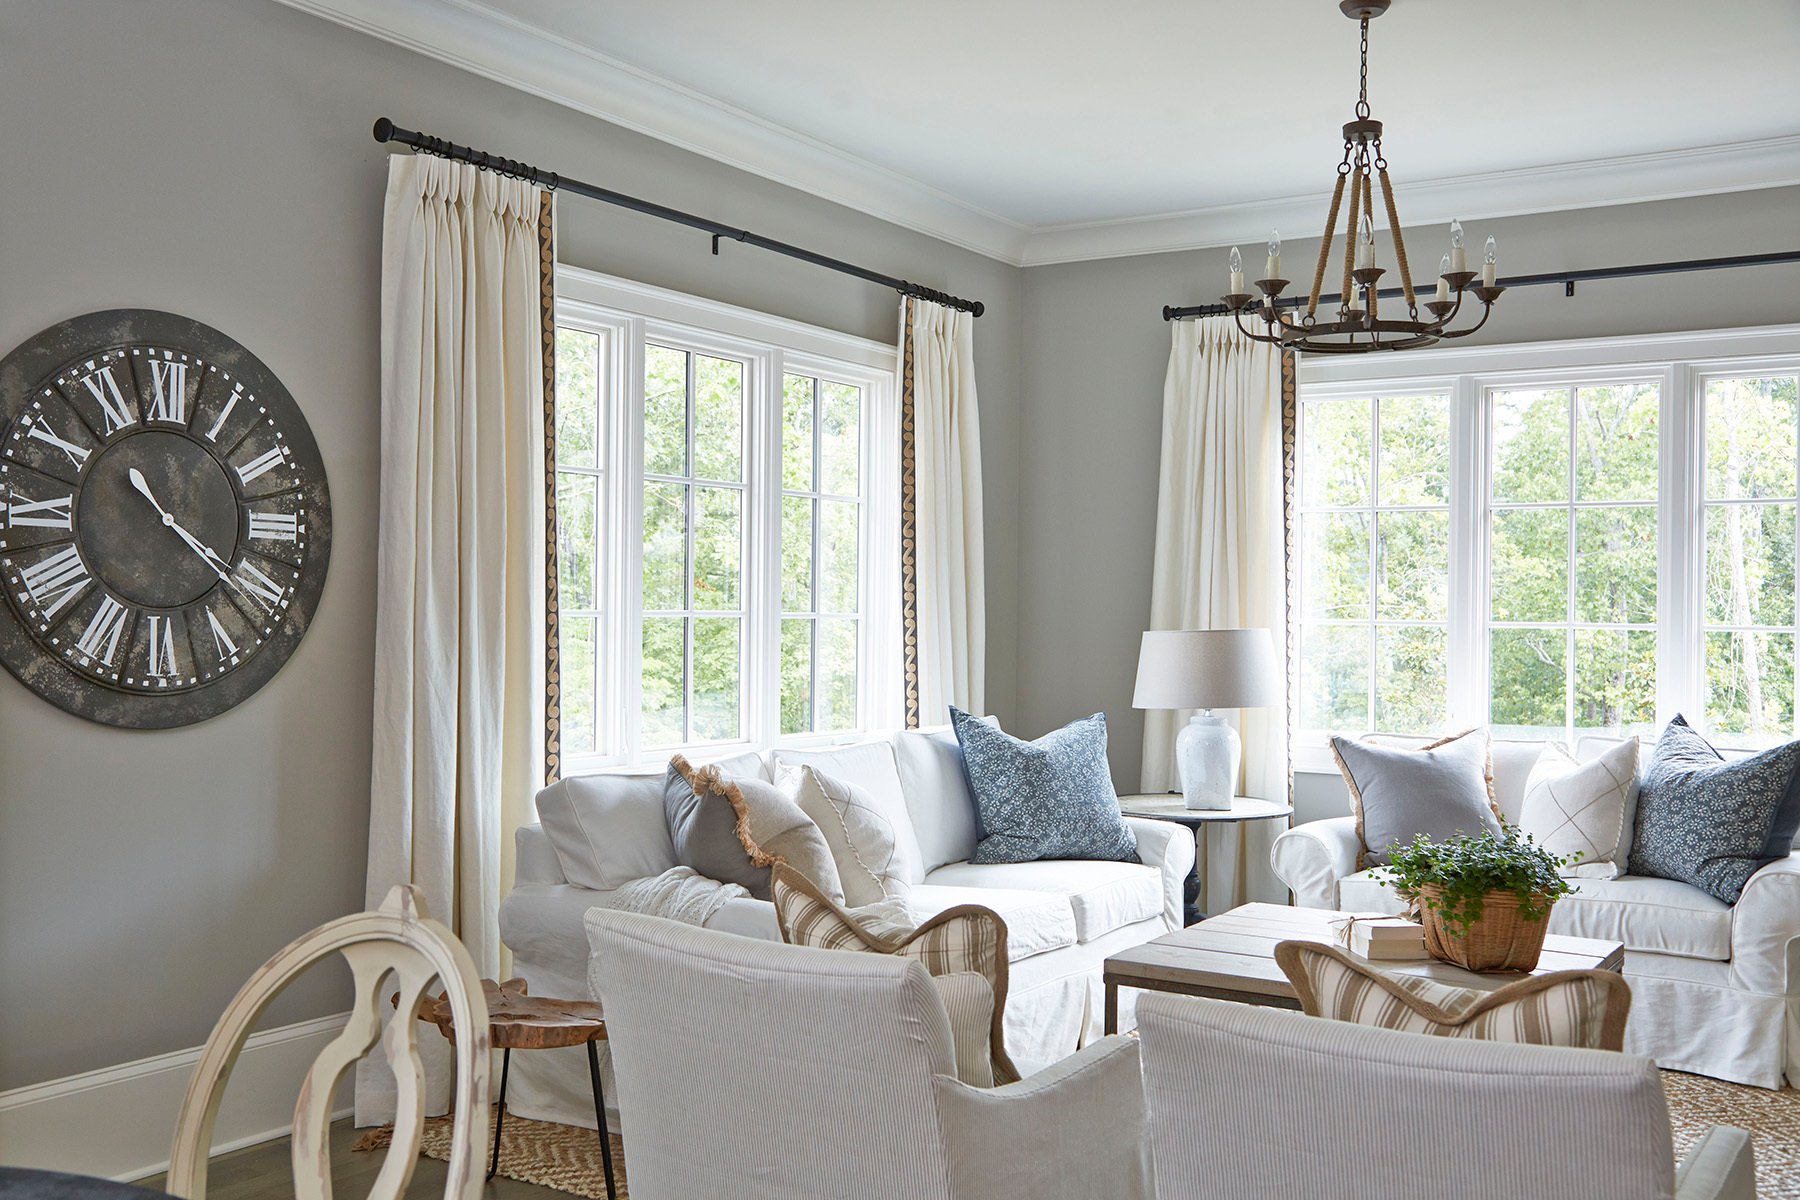 Traditional living room with white windows and trim. Gray walls.